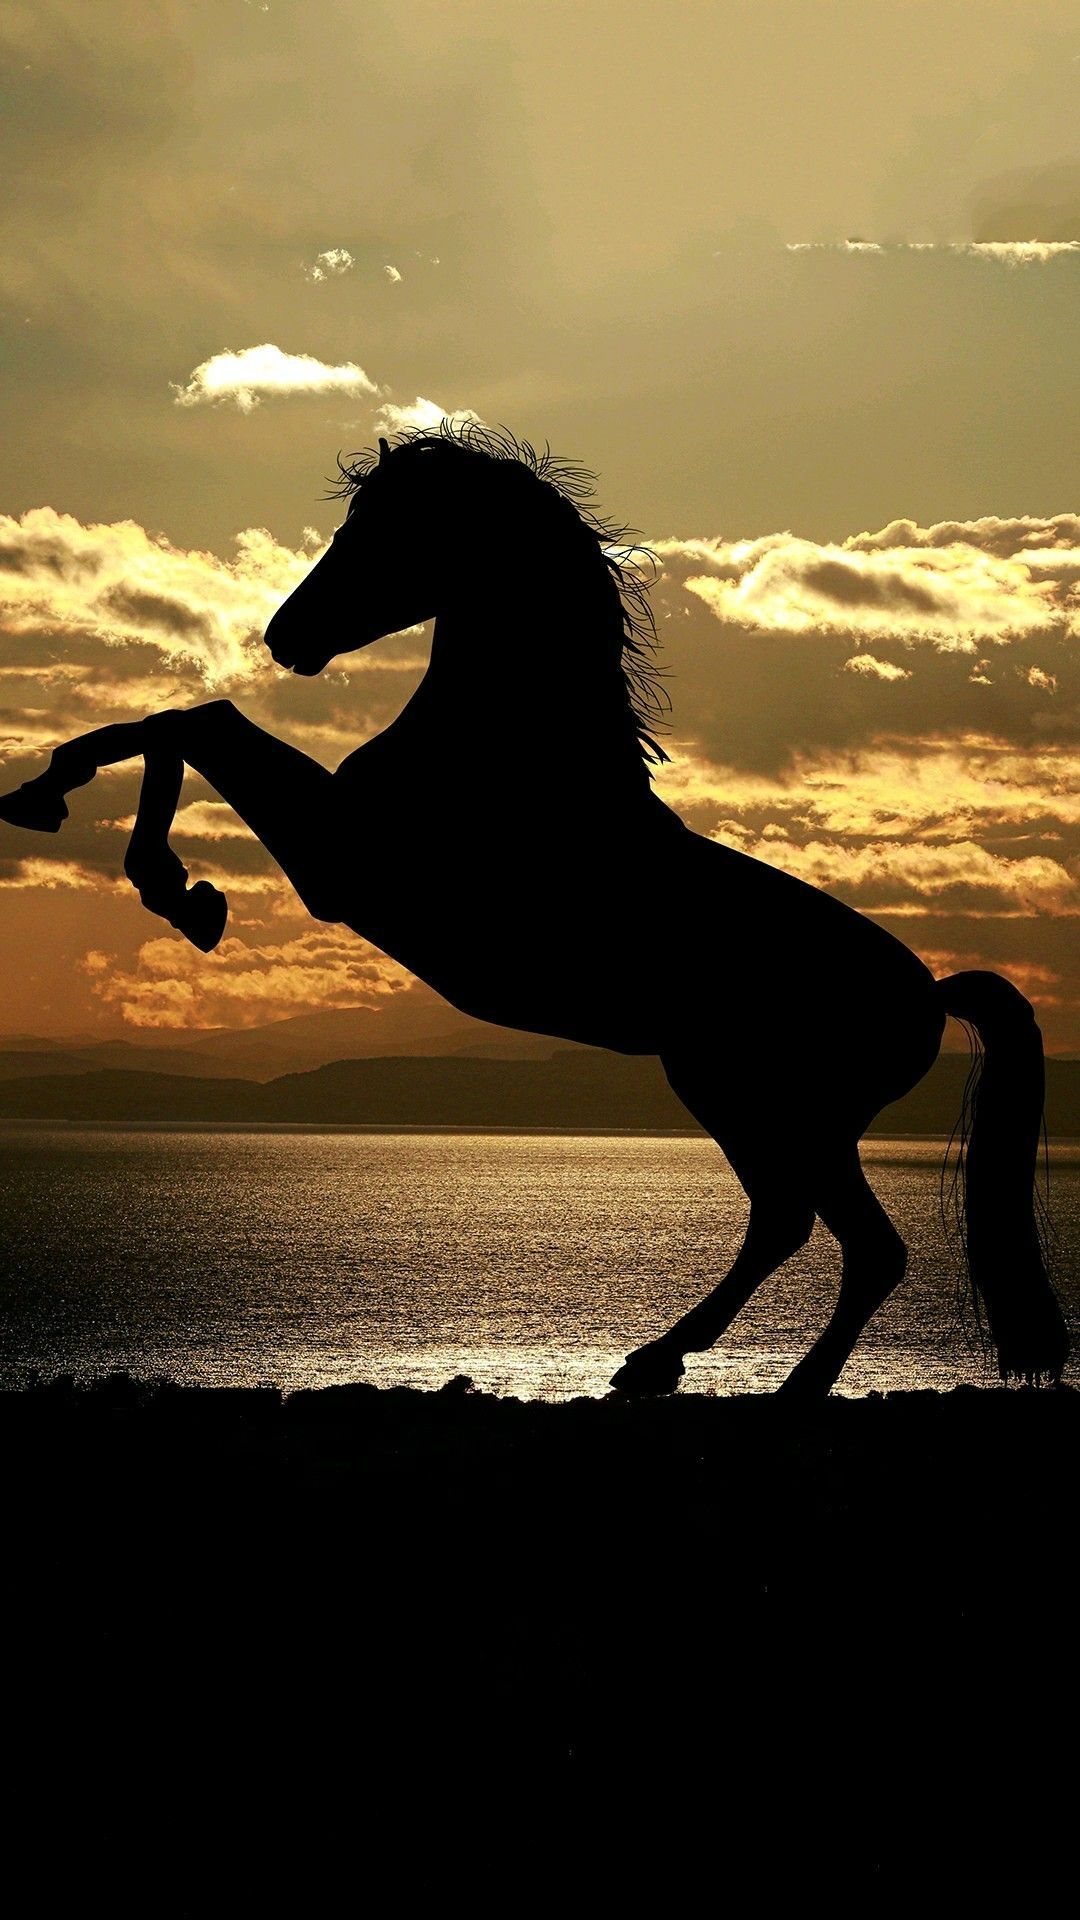 Aesthetic Horse Wallpapers Wallpaper Cave